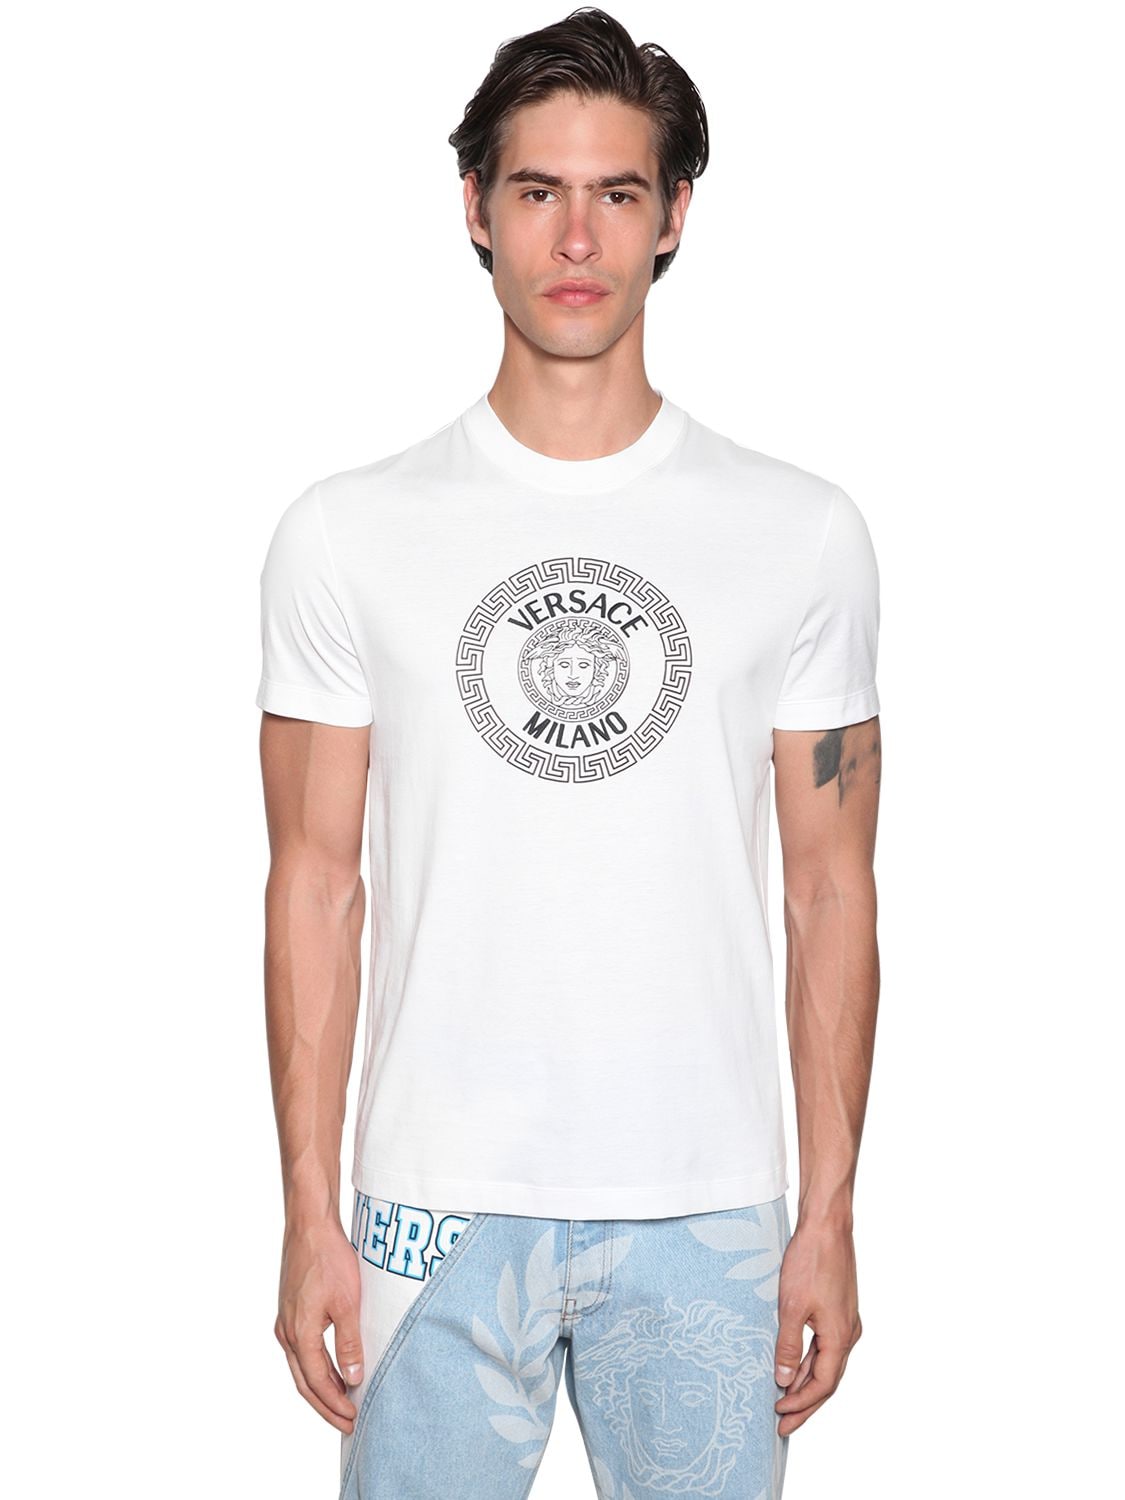 VERSACE EMBROIDERED & PRINTED T-SHIRT,71ILEC015-QTIWNDG1